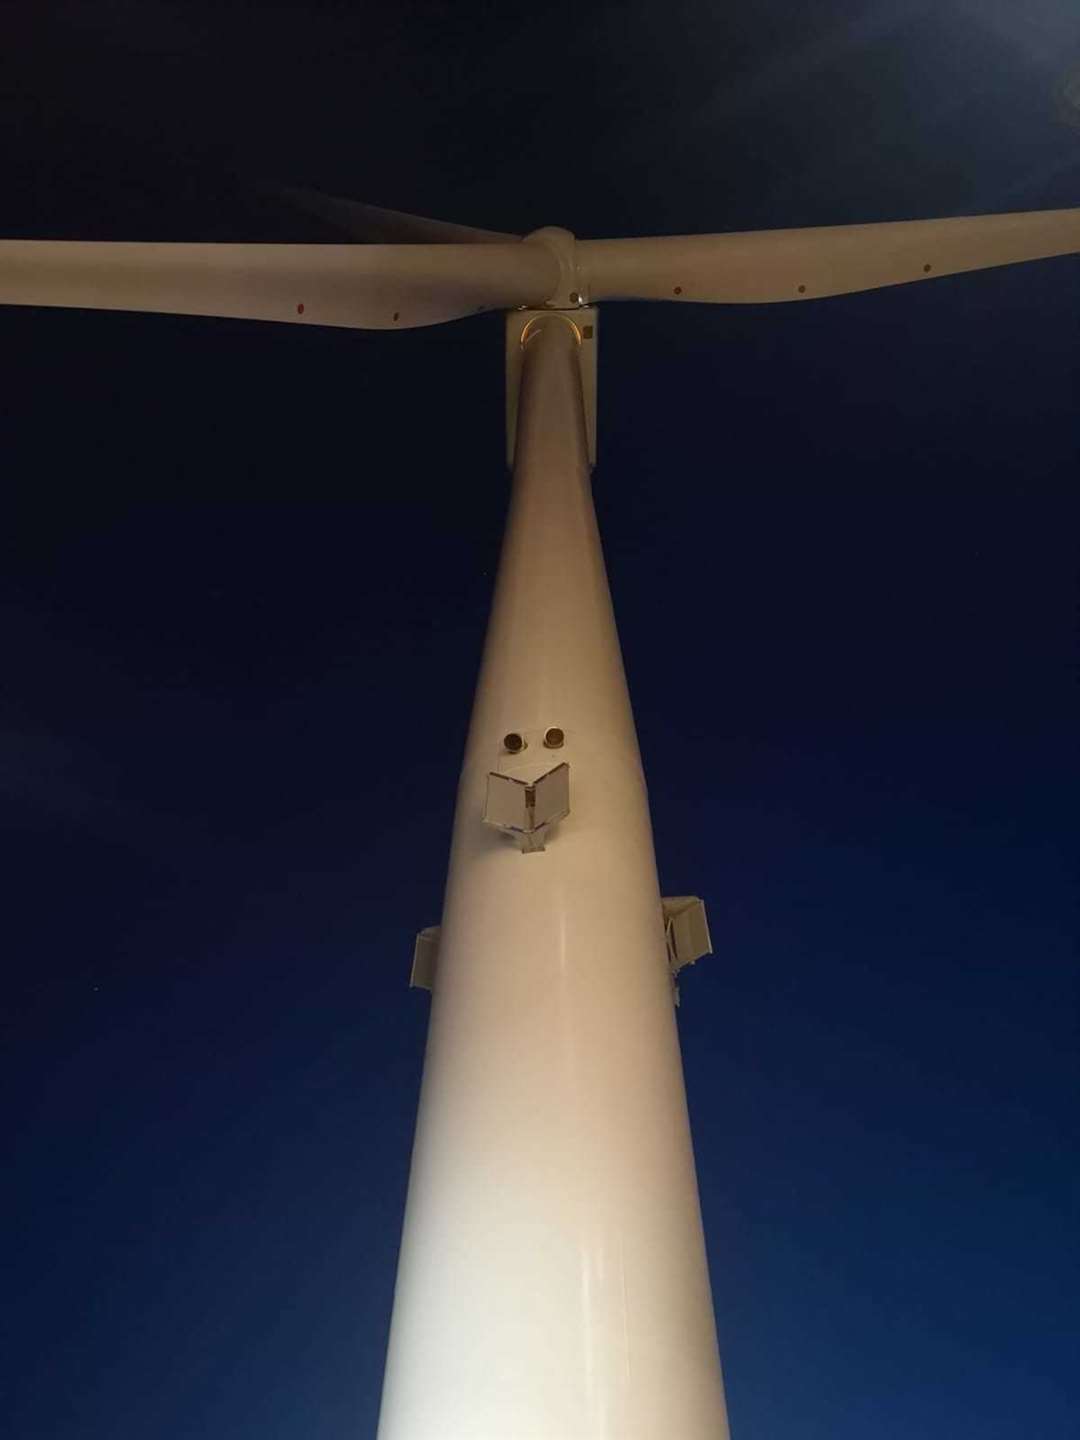 The first wind turbine has been erected at the Moray East offshore wind farm.